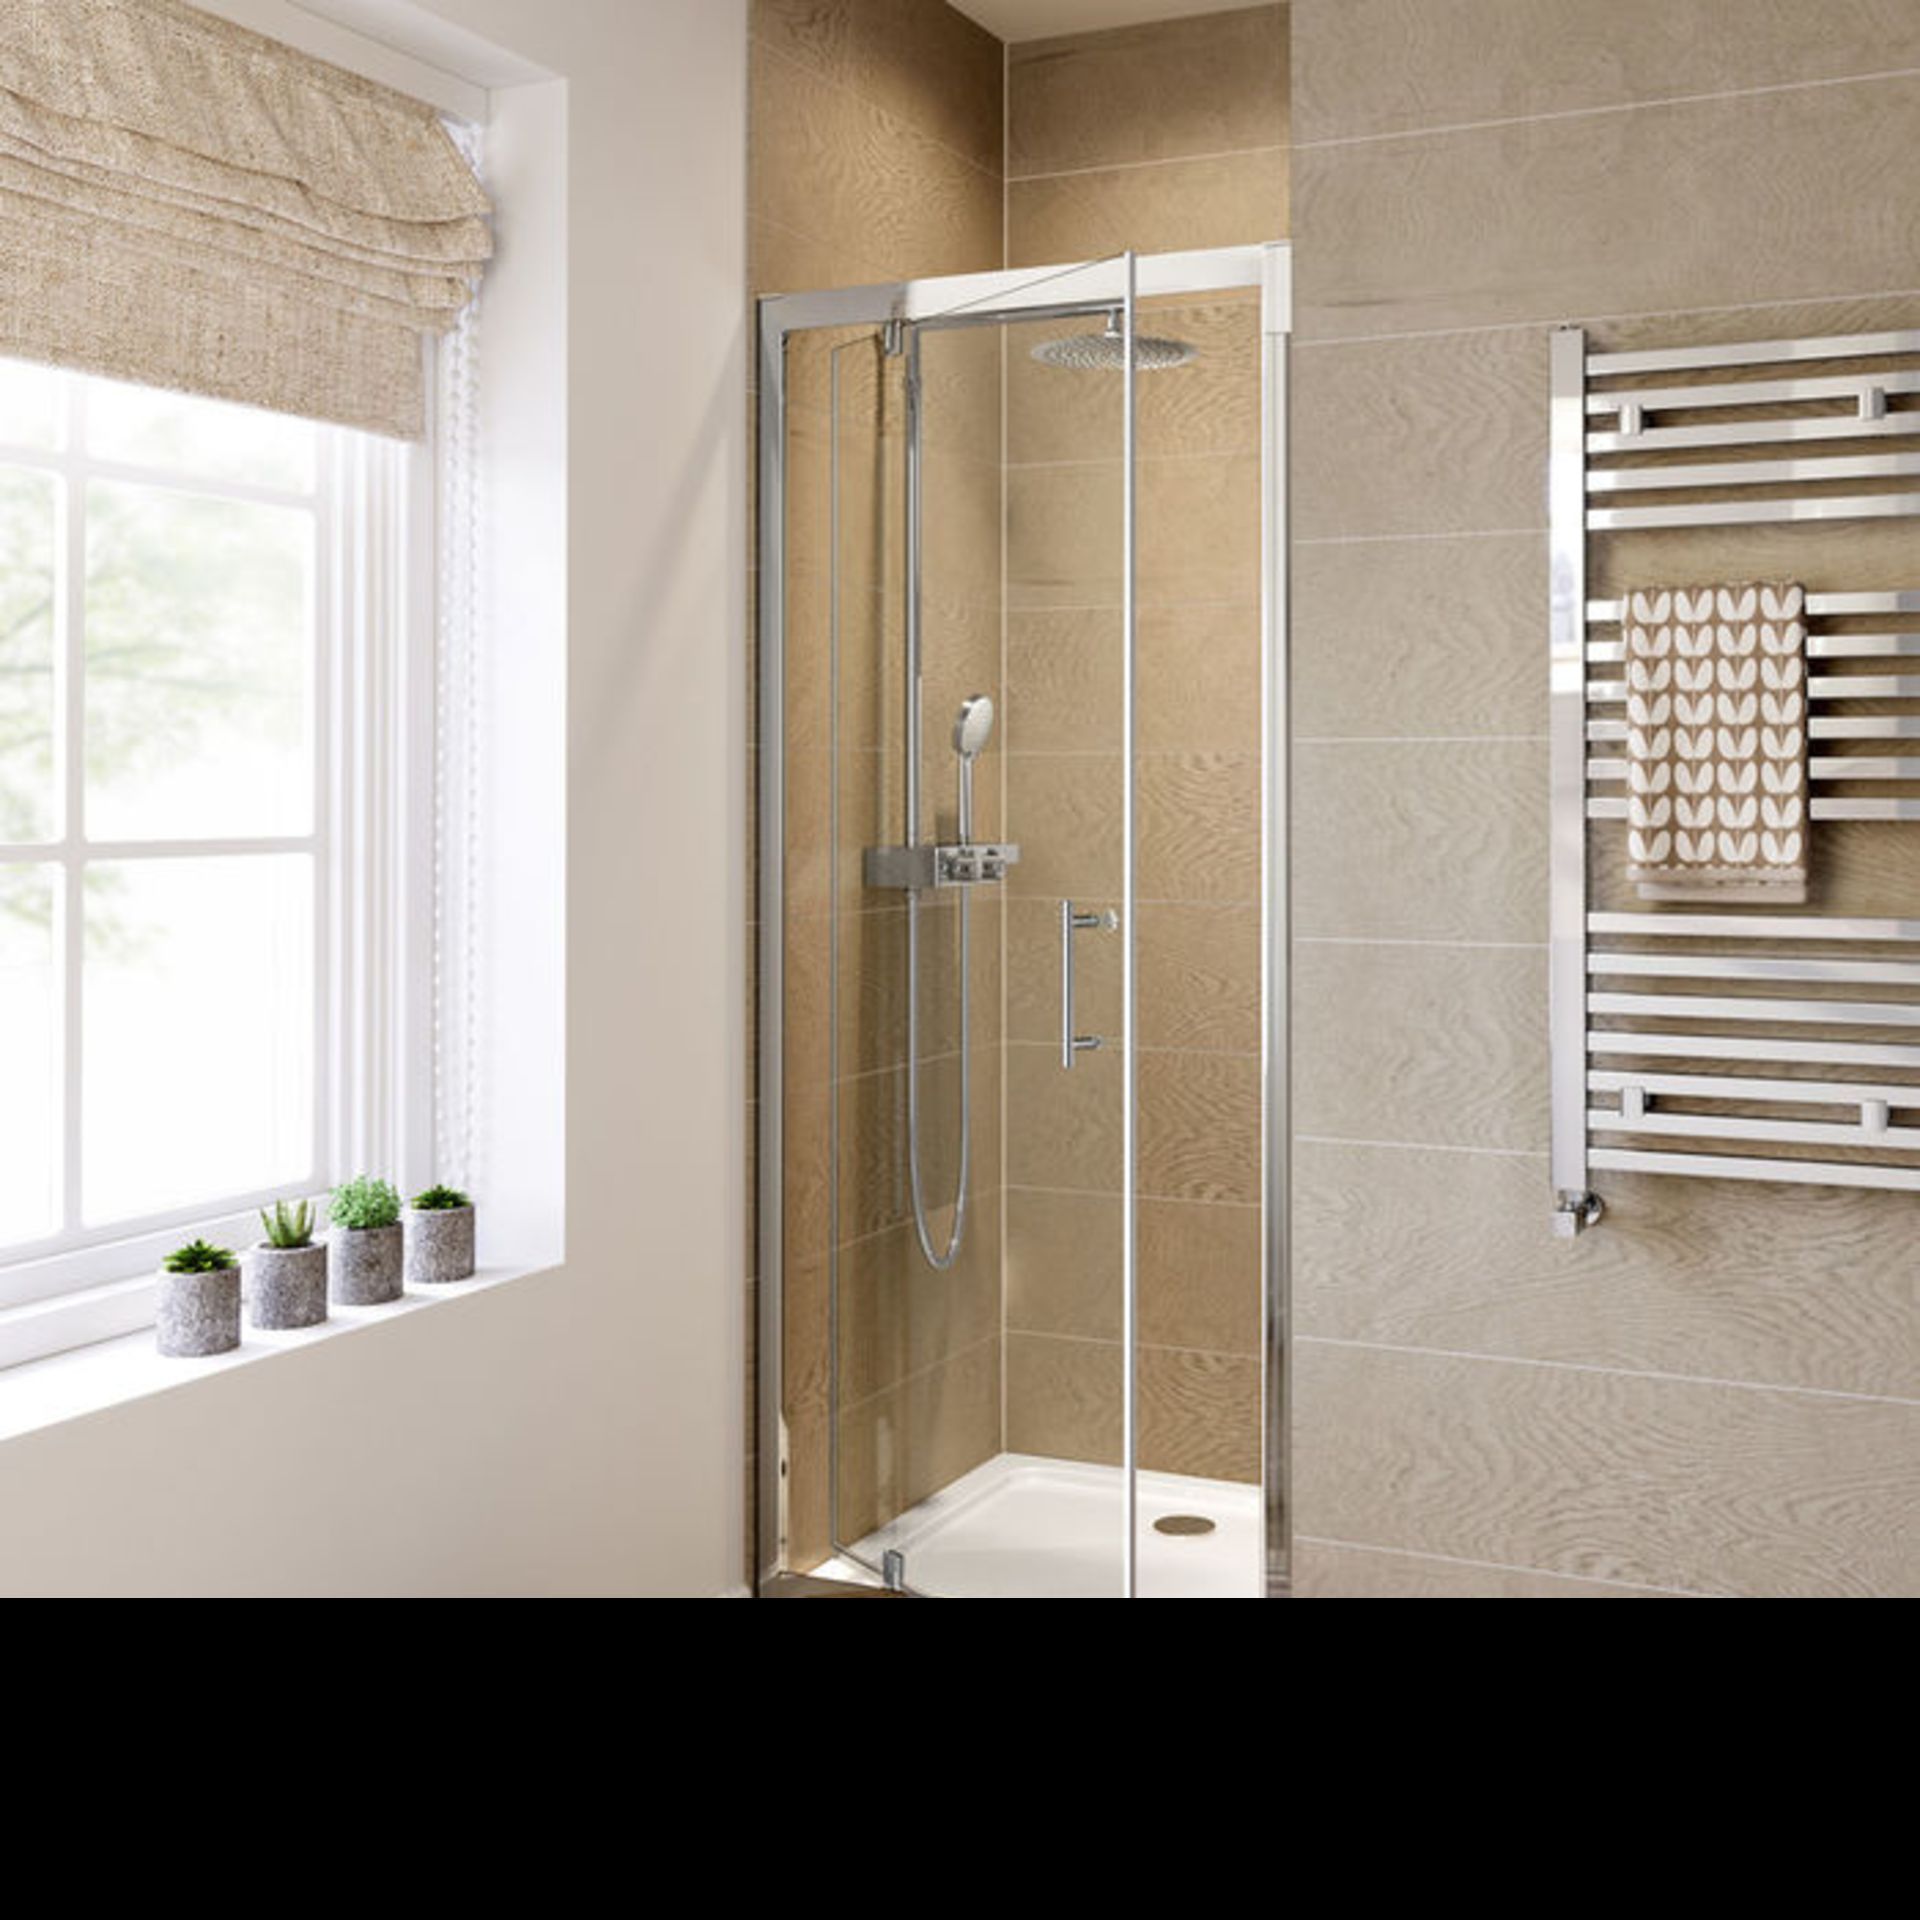 New (Aa103) New 700mm - 6mm - Premium Pivot Shower Door. RRP £299.99.8mm Safety Glass Fully W... - Image 2 of 2